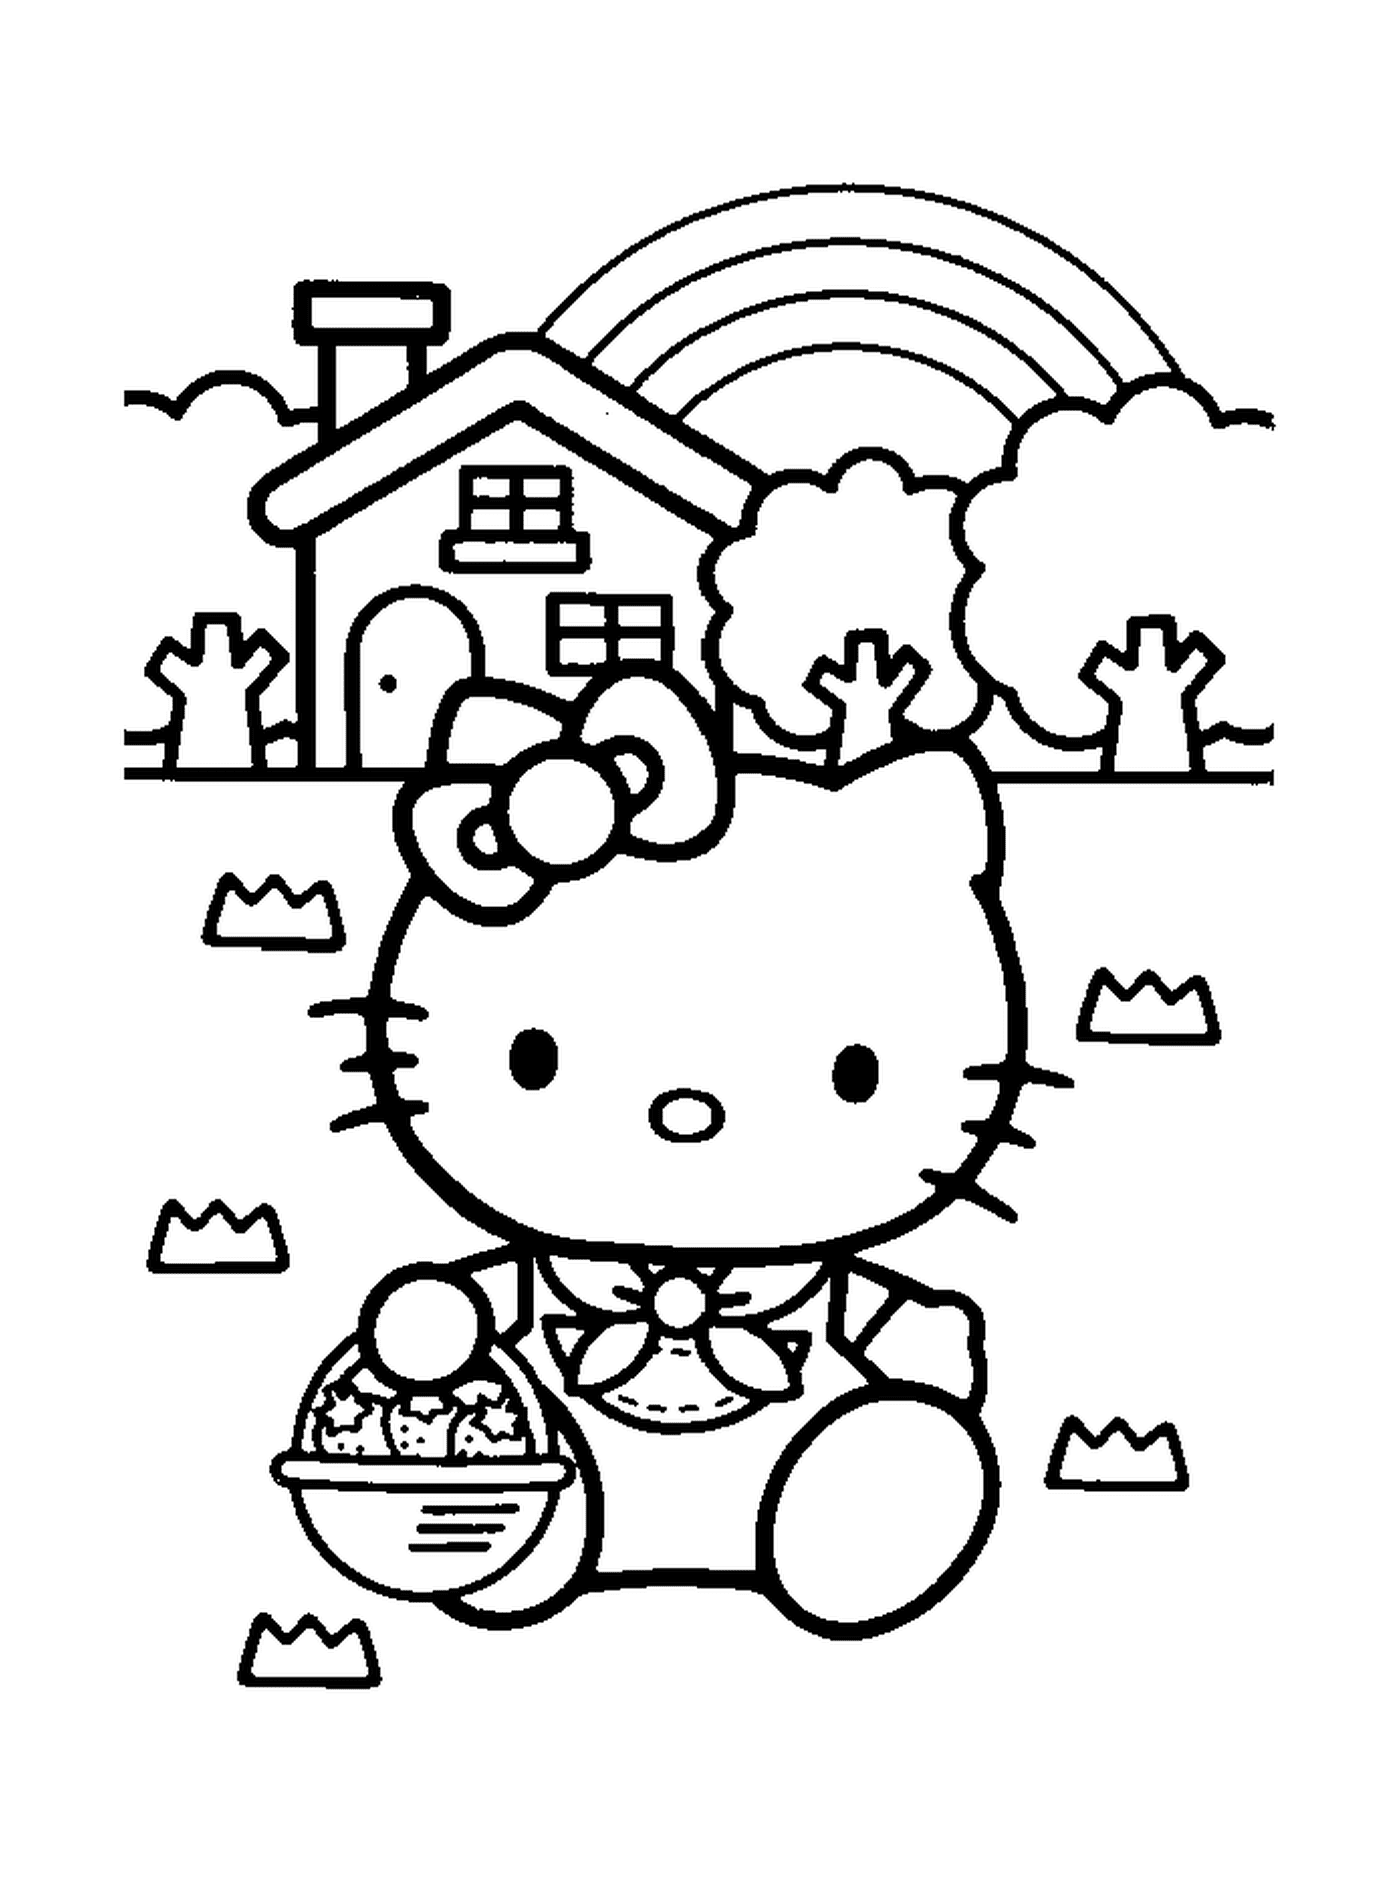  Hello Kitty with a basket of apples 